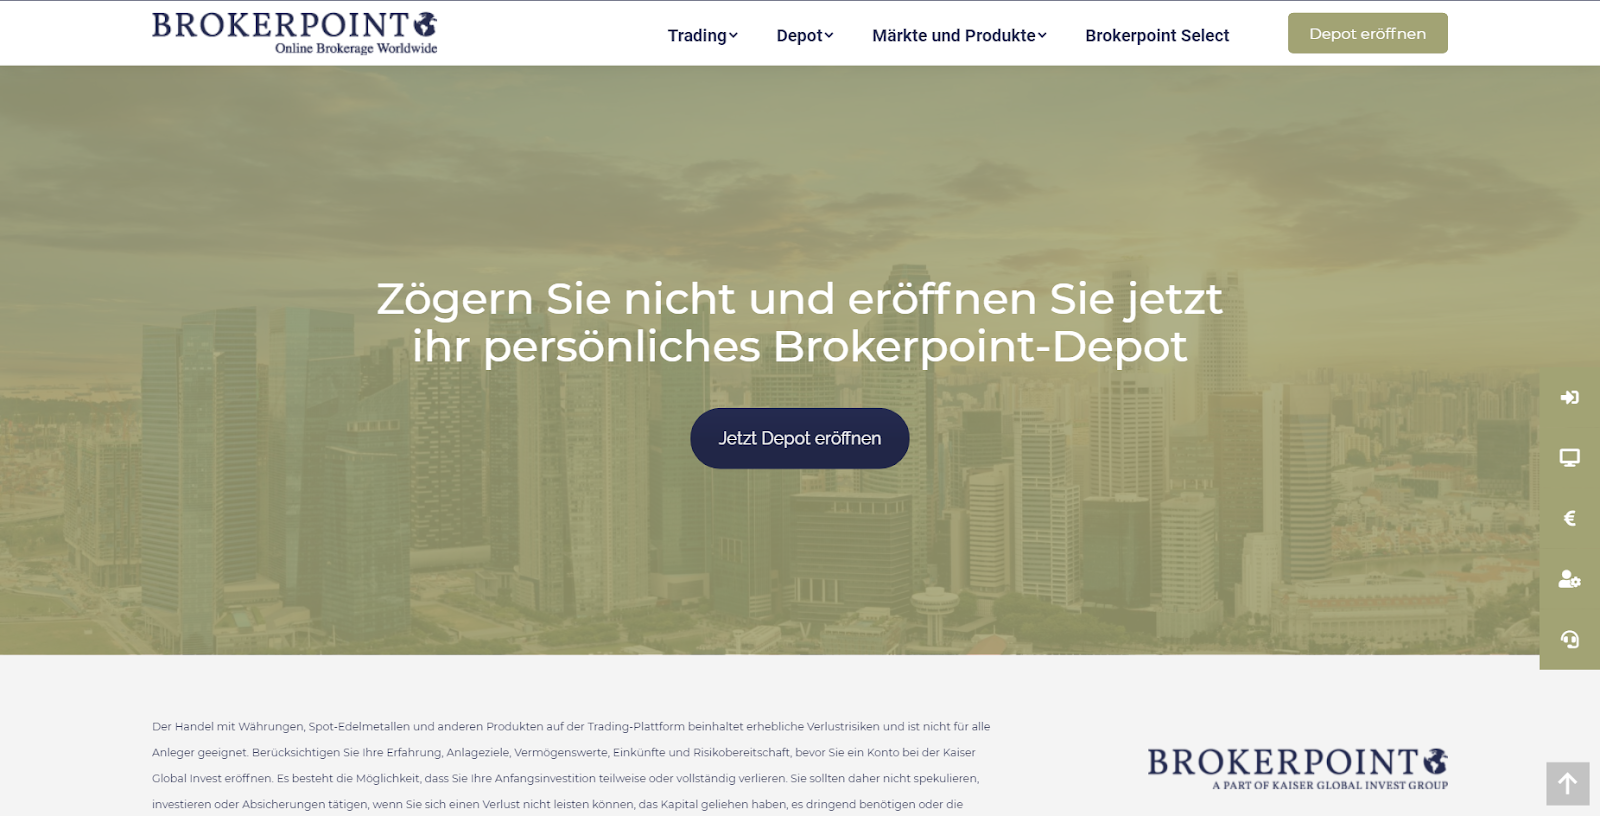 Brokerpoint’s Review - Account opening